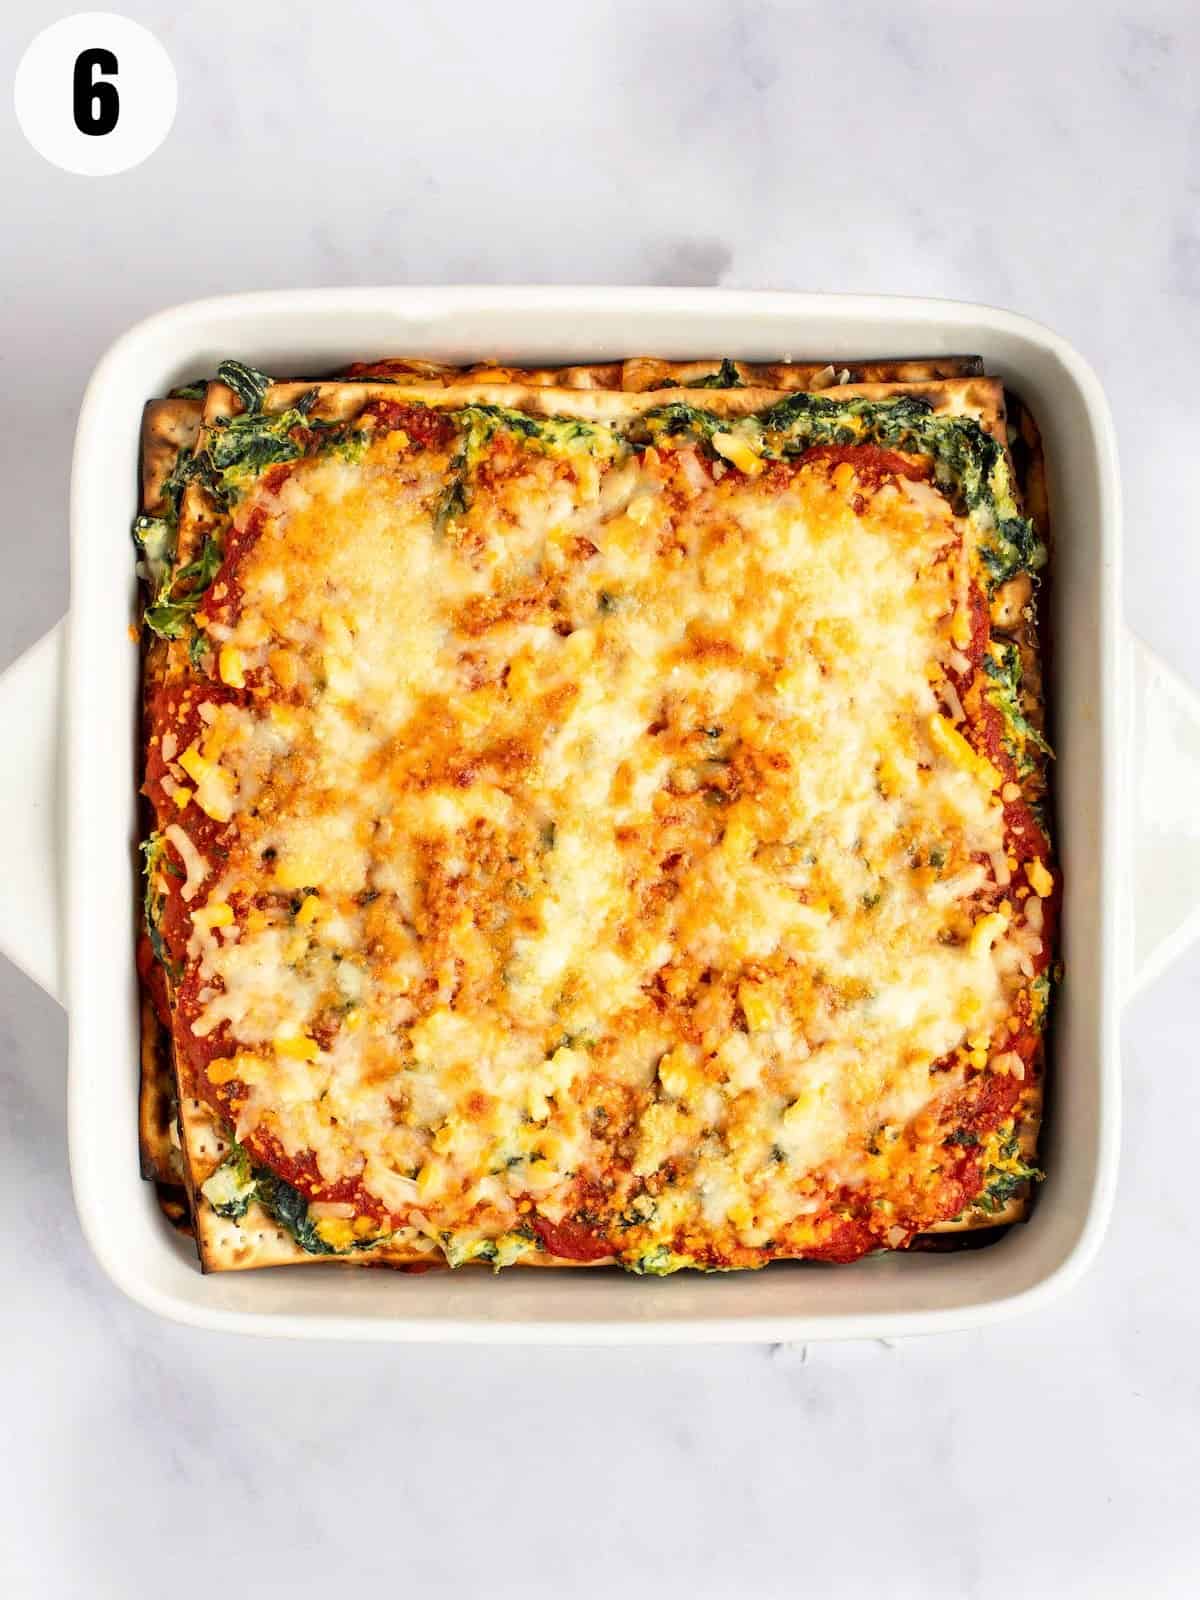 Baked matzo lasagna with melted cheese and spinach.